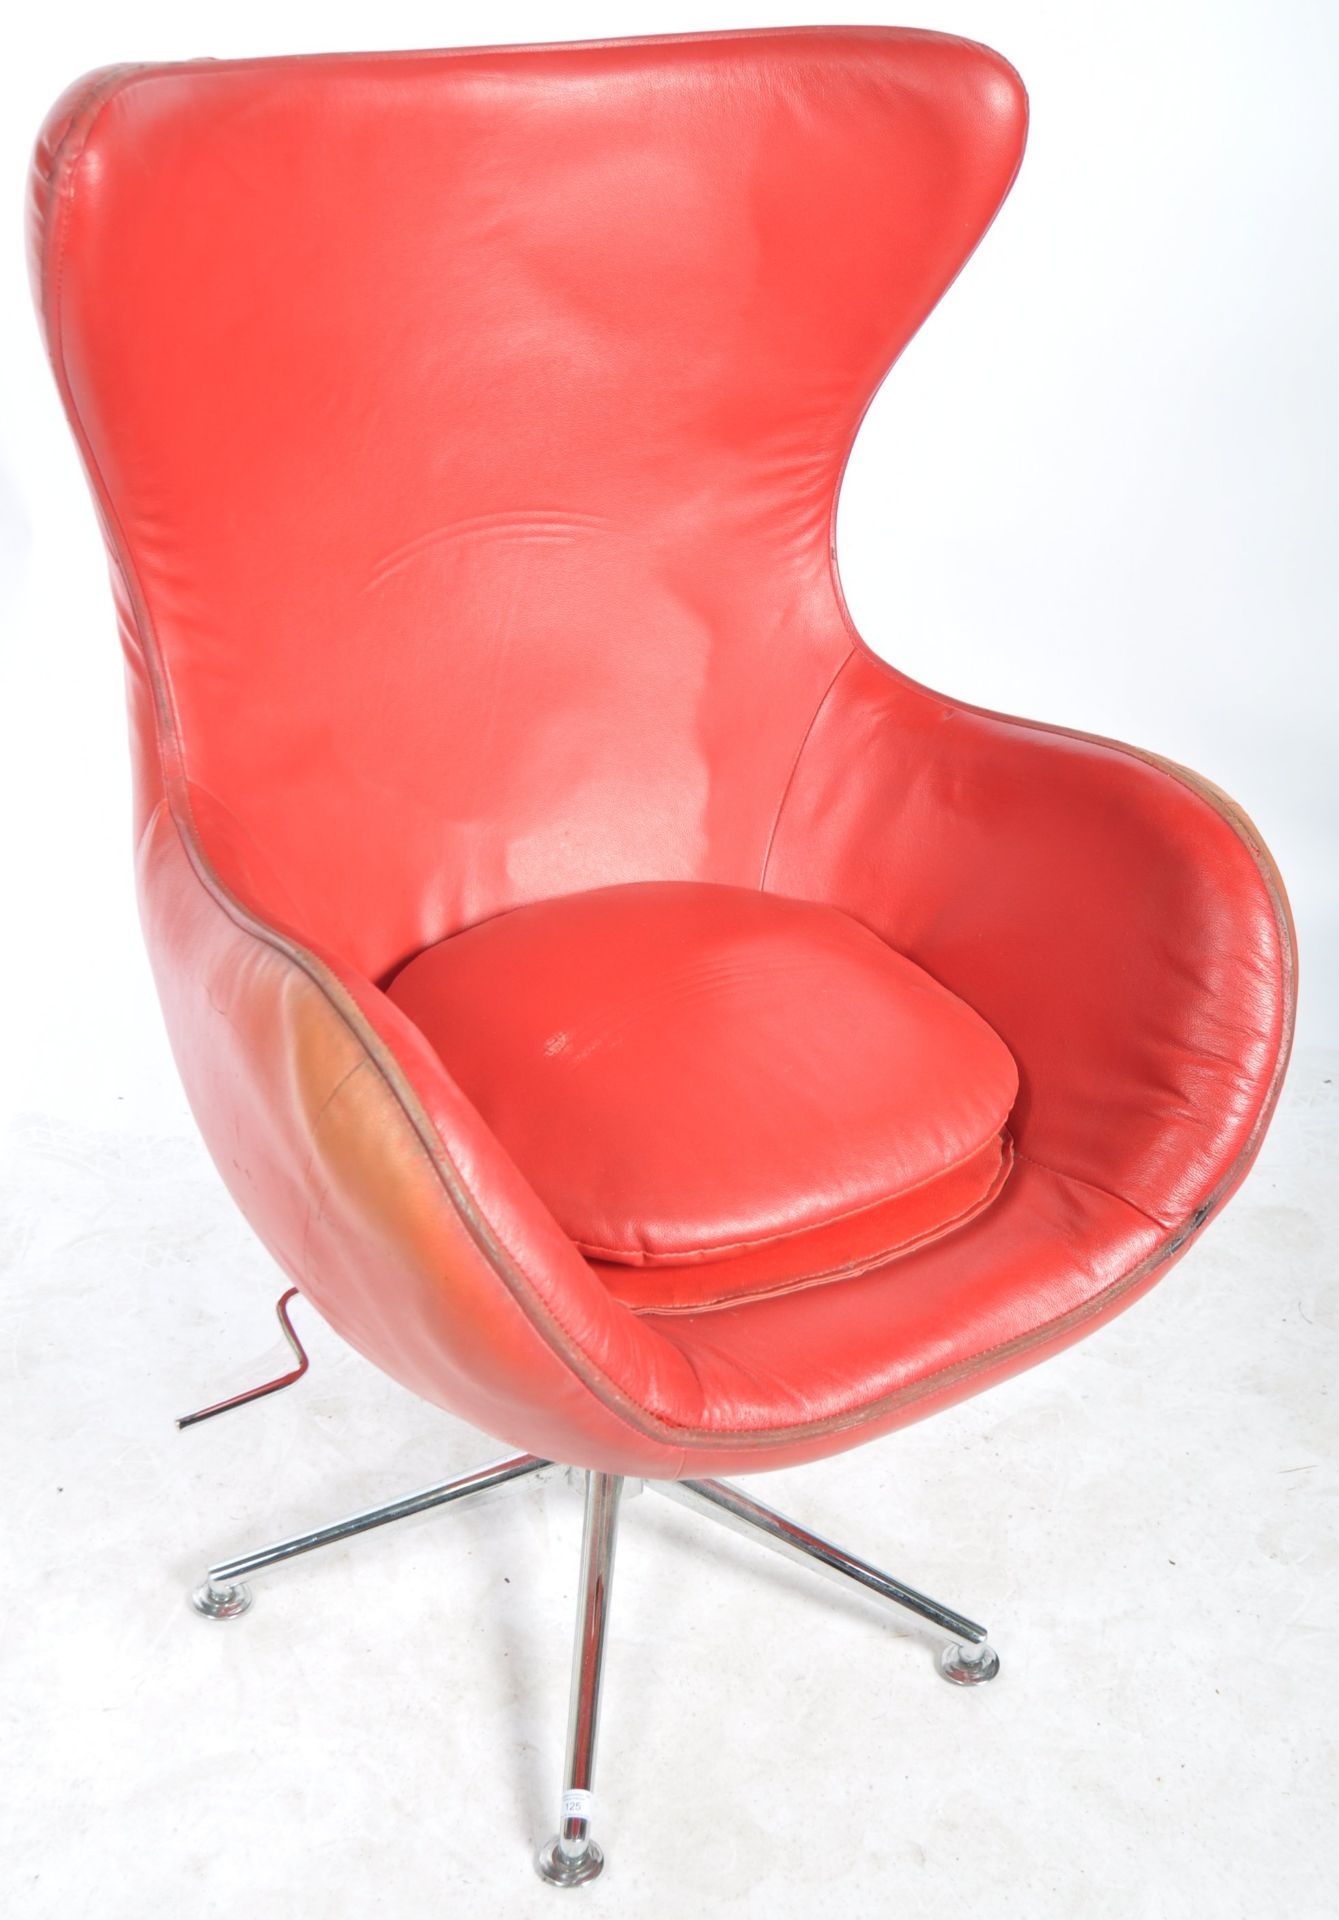 MID CENTURY RED LEATHER AND CHROME SWIVEL EGG CHAIR - Image 2 of 6